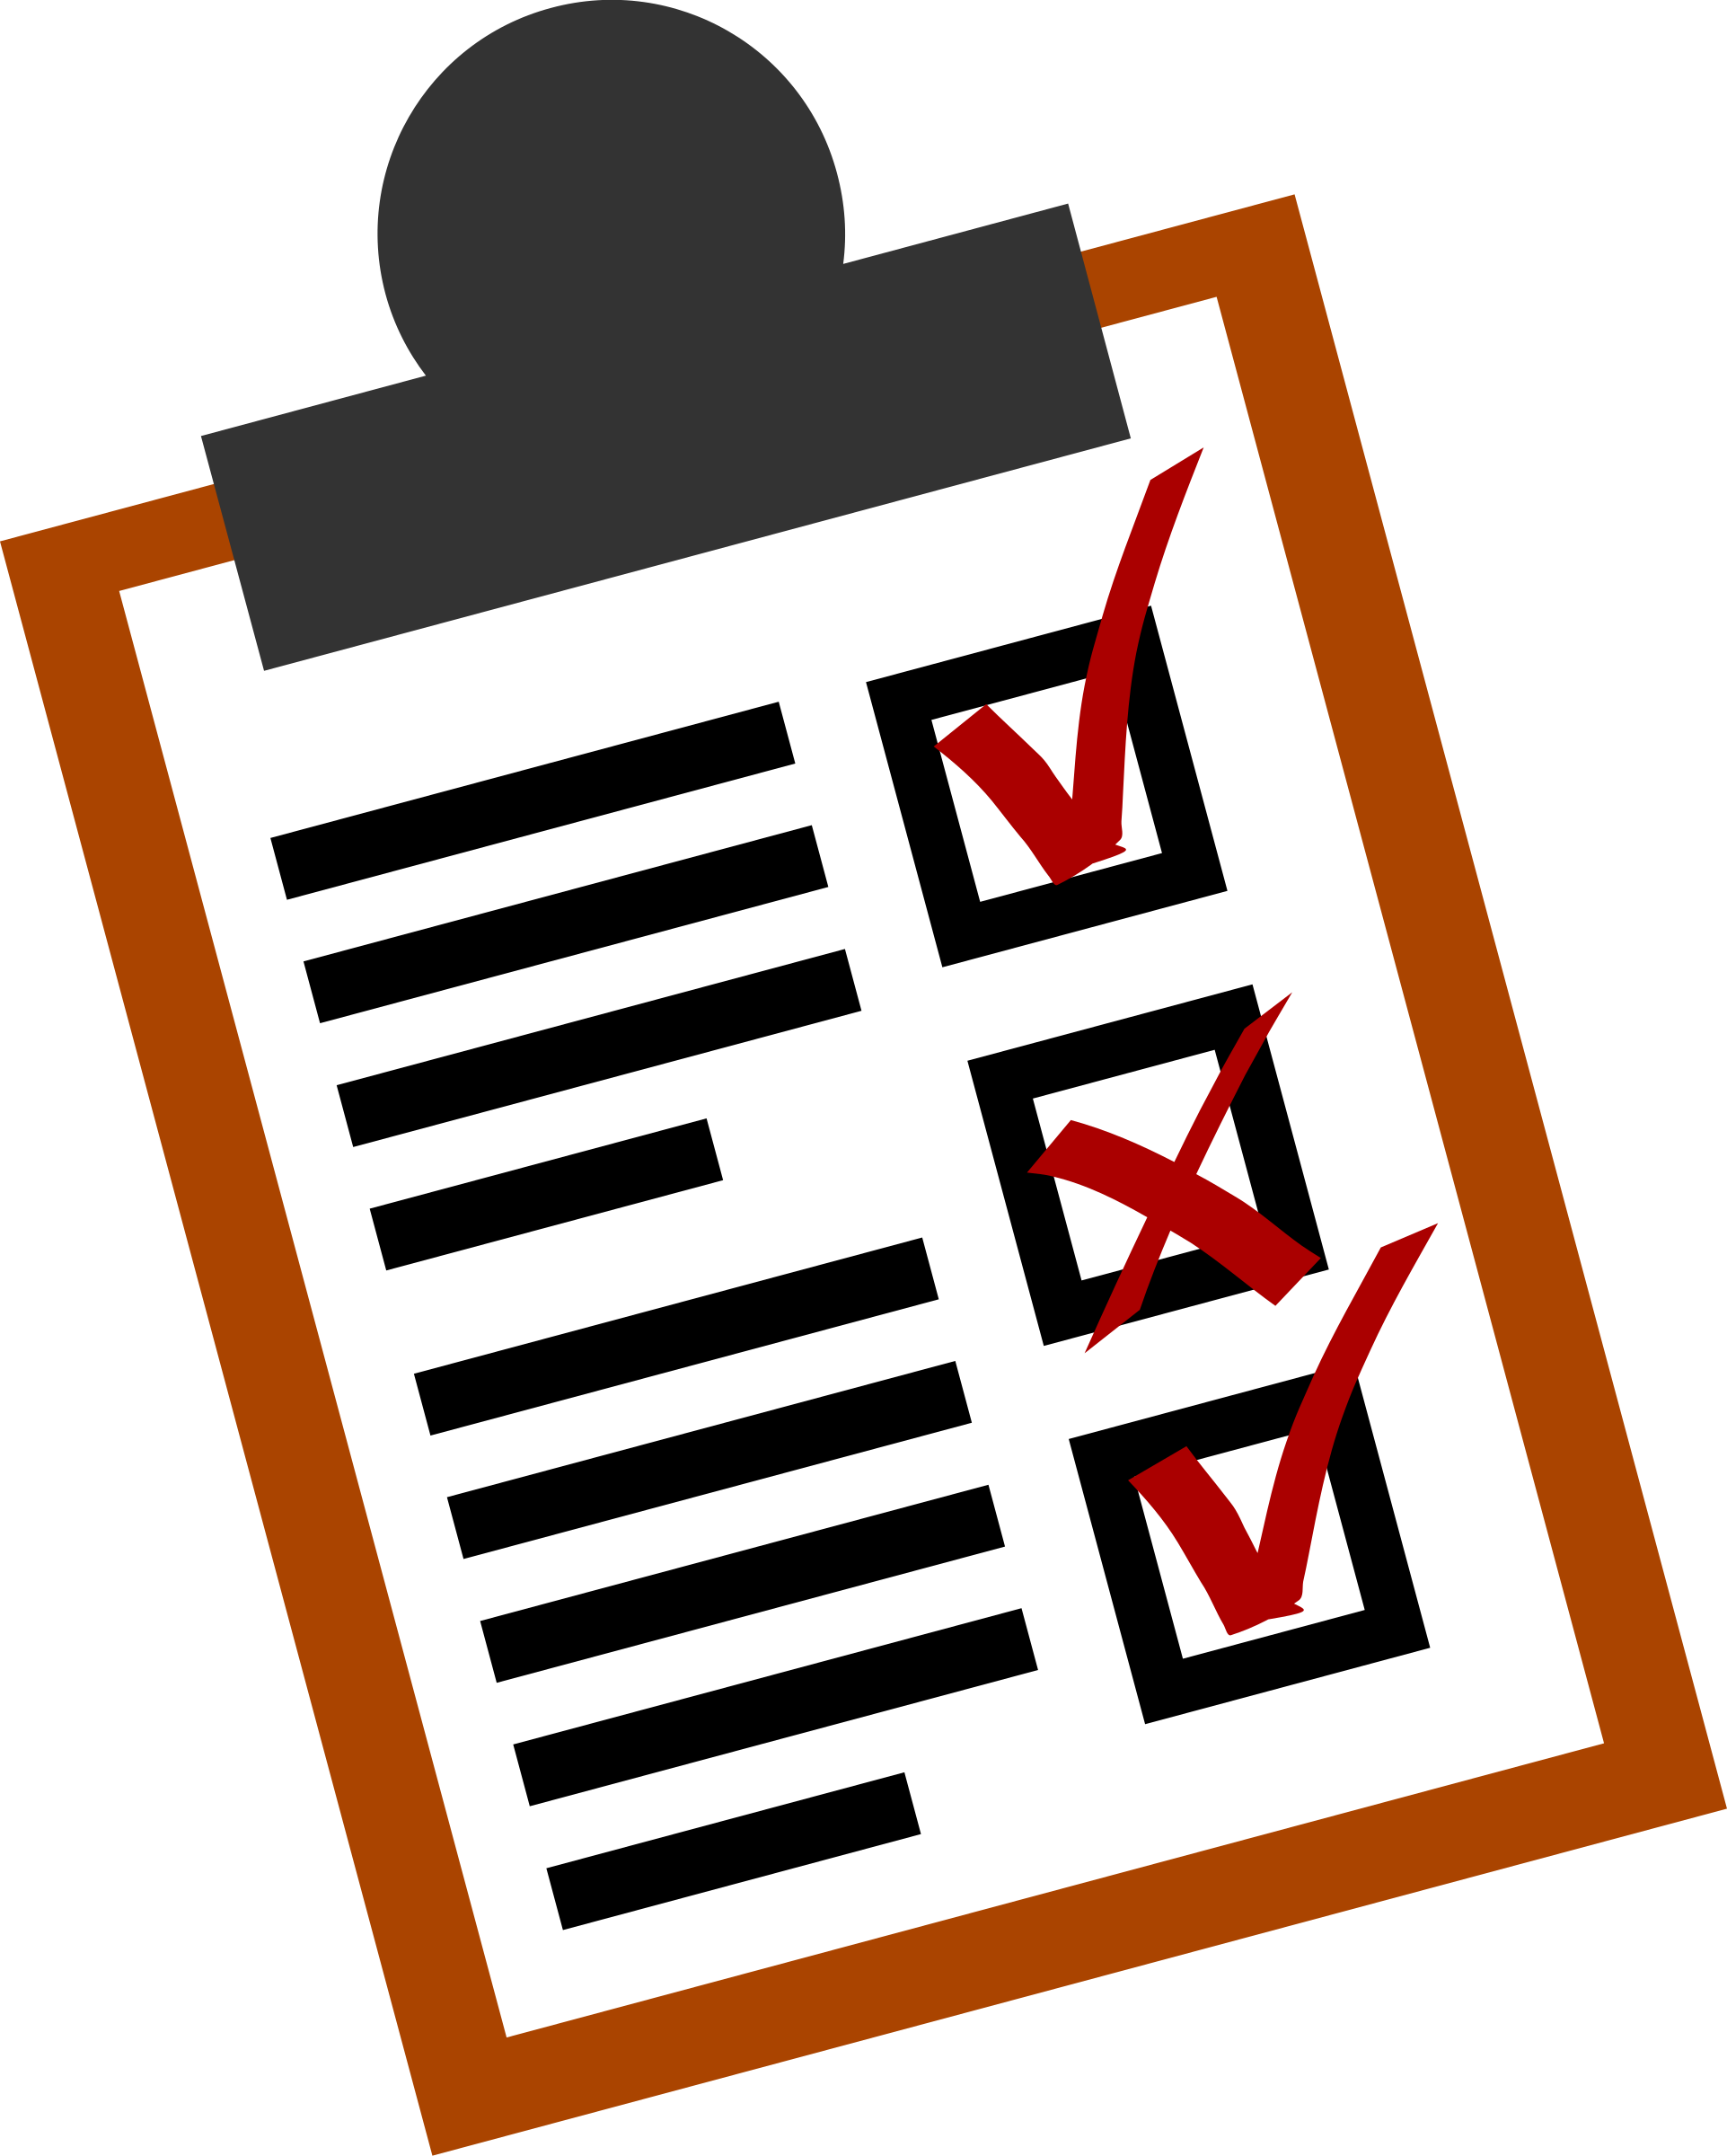 To Do List Clipart, Download Free Clip Art on Clipart Bay